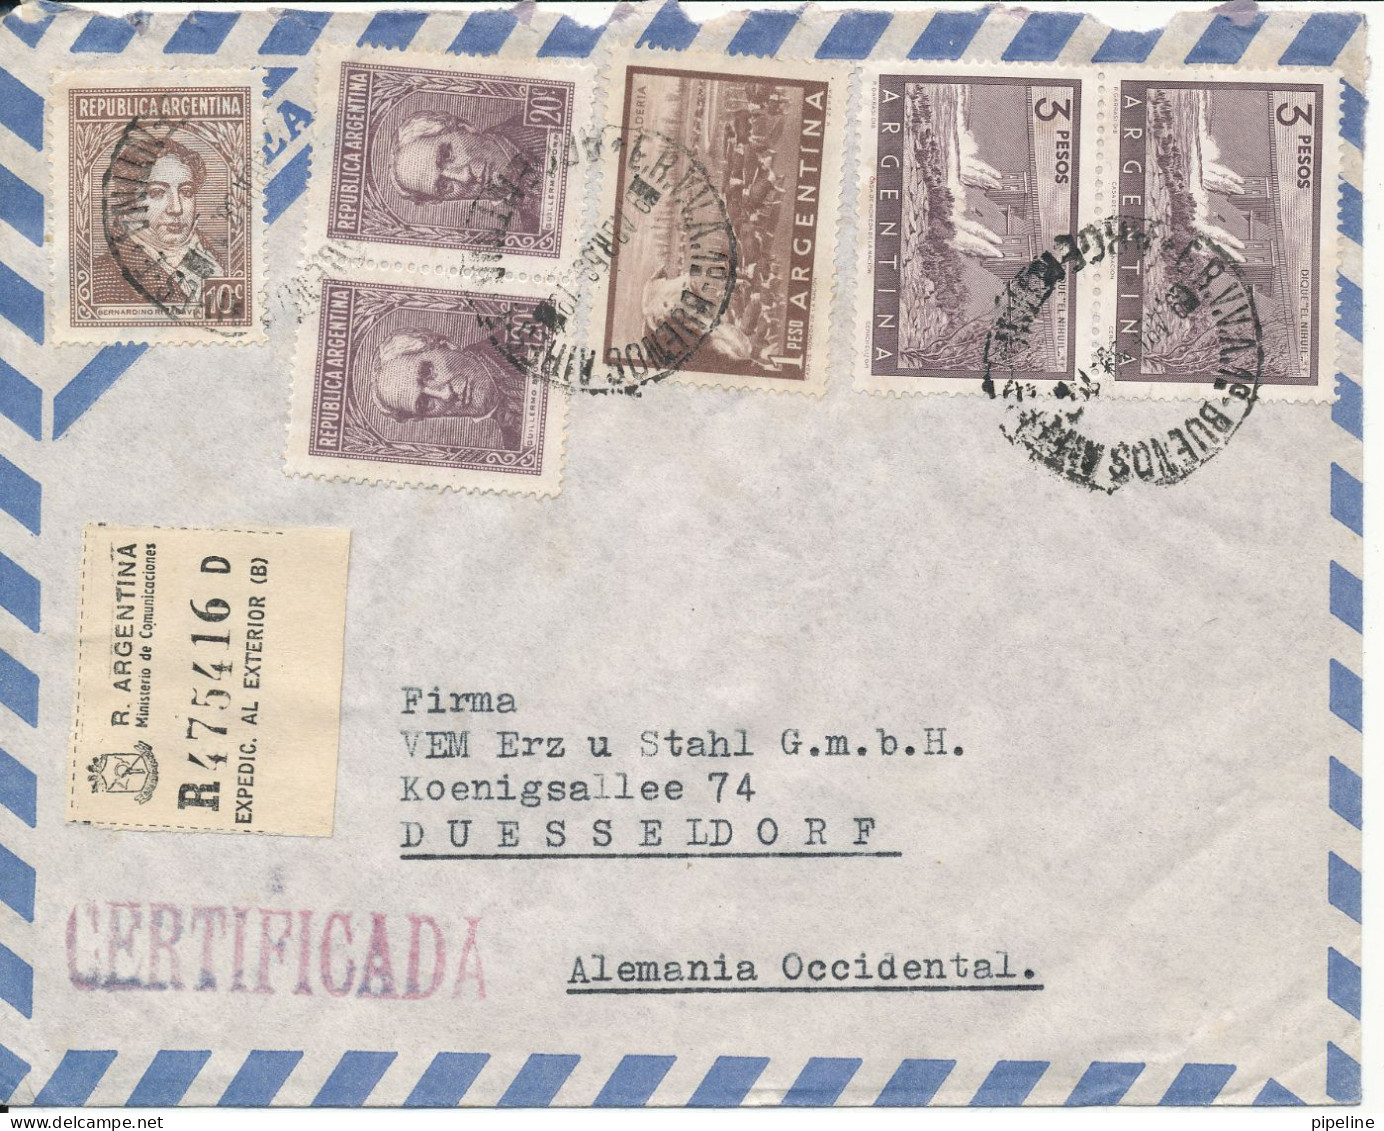 Argentina Registered Air Mail Cover Sent To Germany 9-4-1956 With More Stamps - Airmail